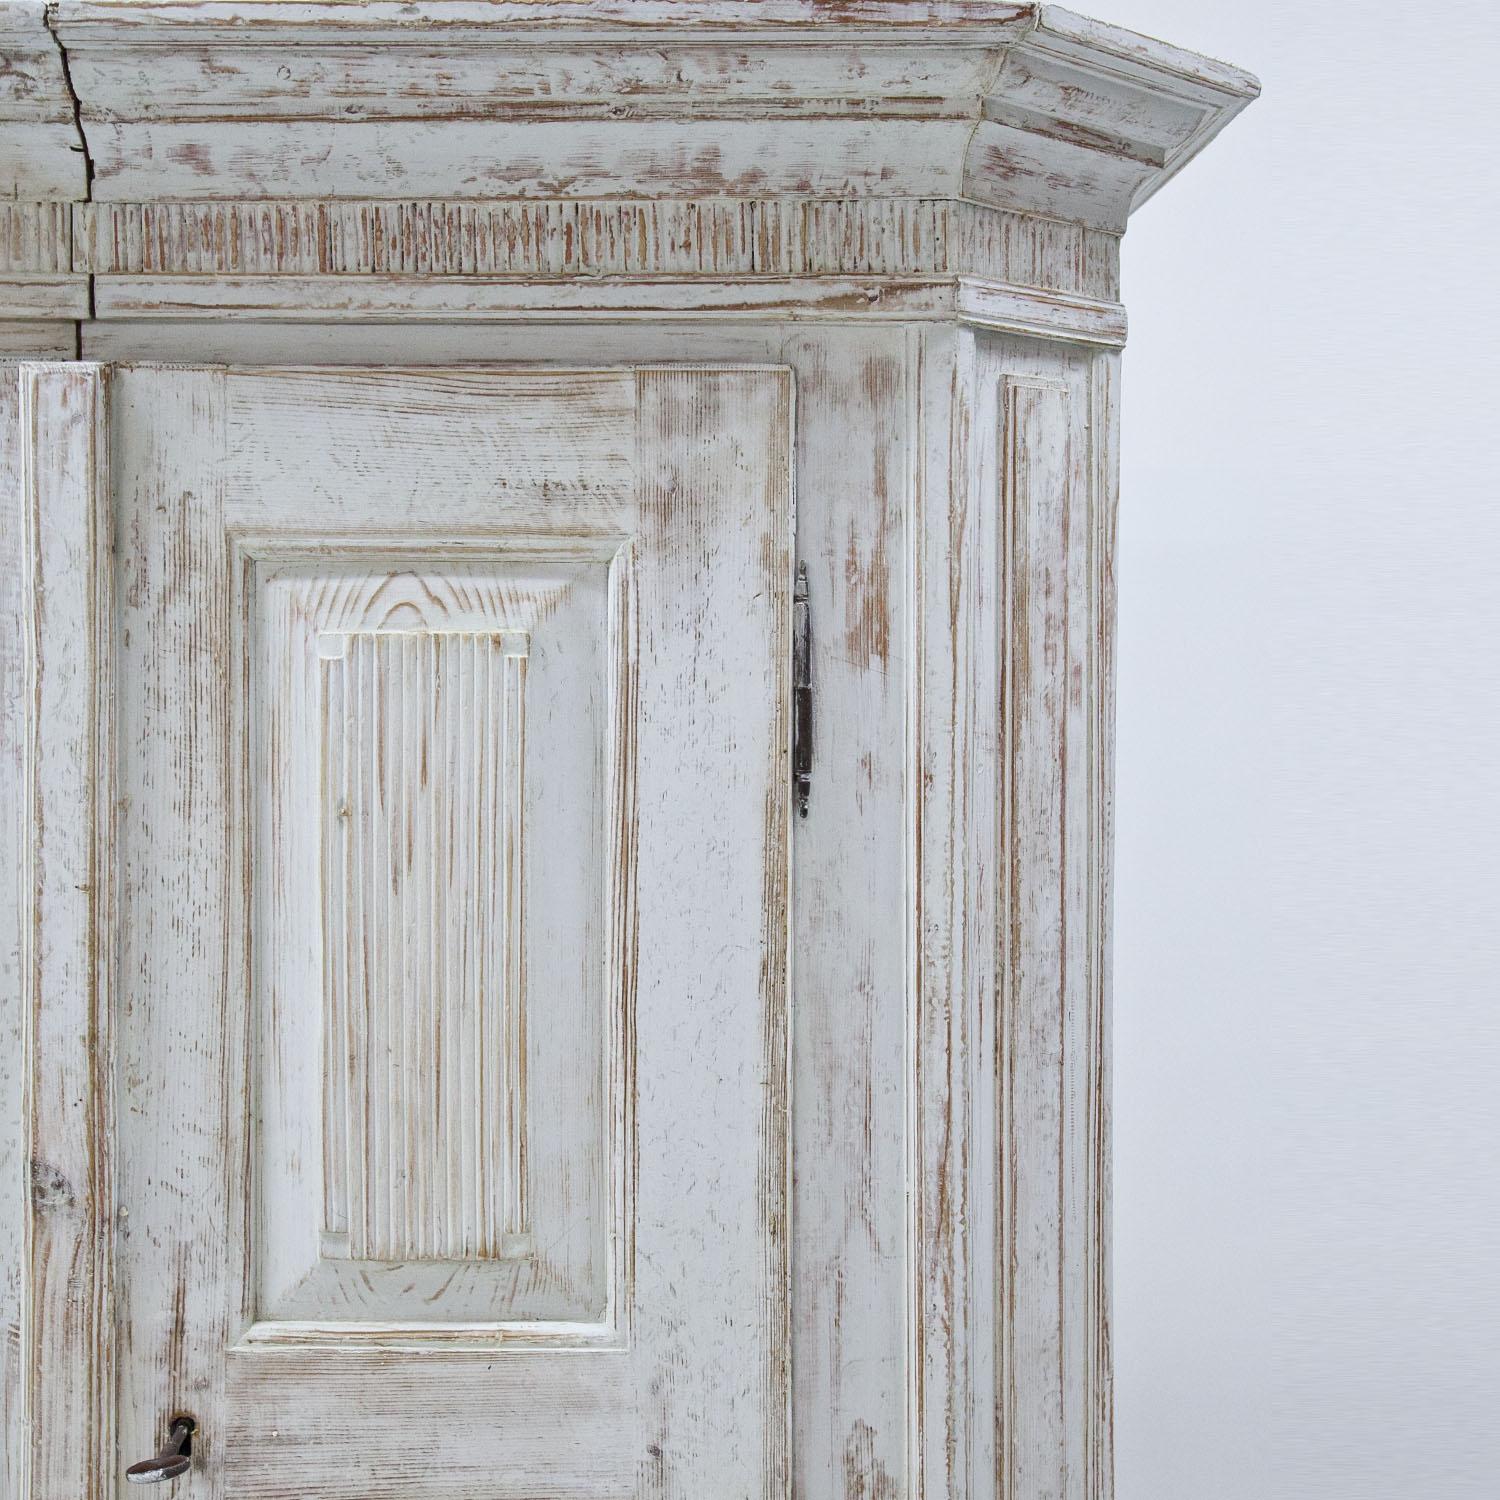 Two-doored armoire on short feet. The body with slanted edges, a protruding cornice and fillings on the doors, the base and the sides. Decorative vertical grooves on the doors and below the cornice. The white paint is new and has a worn-looking